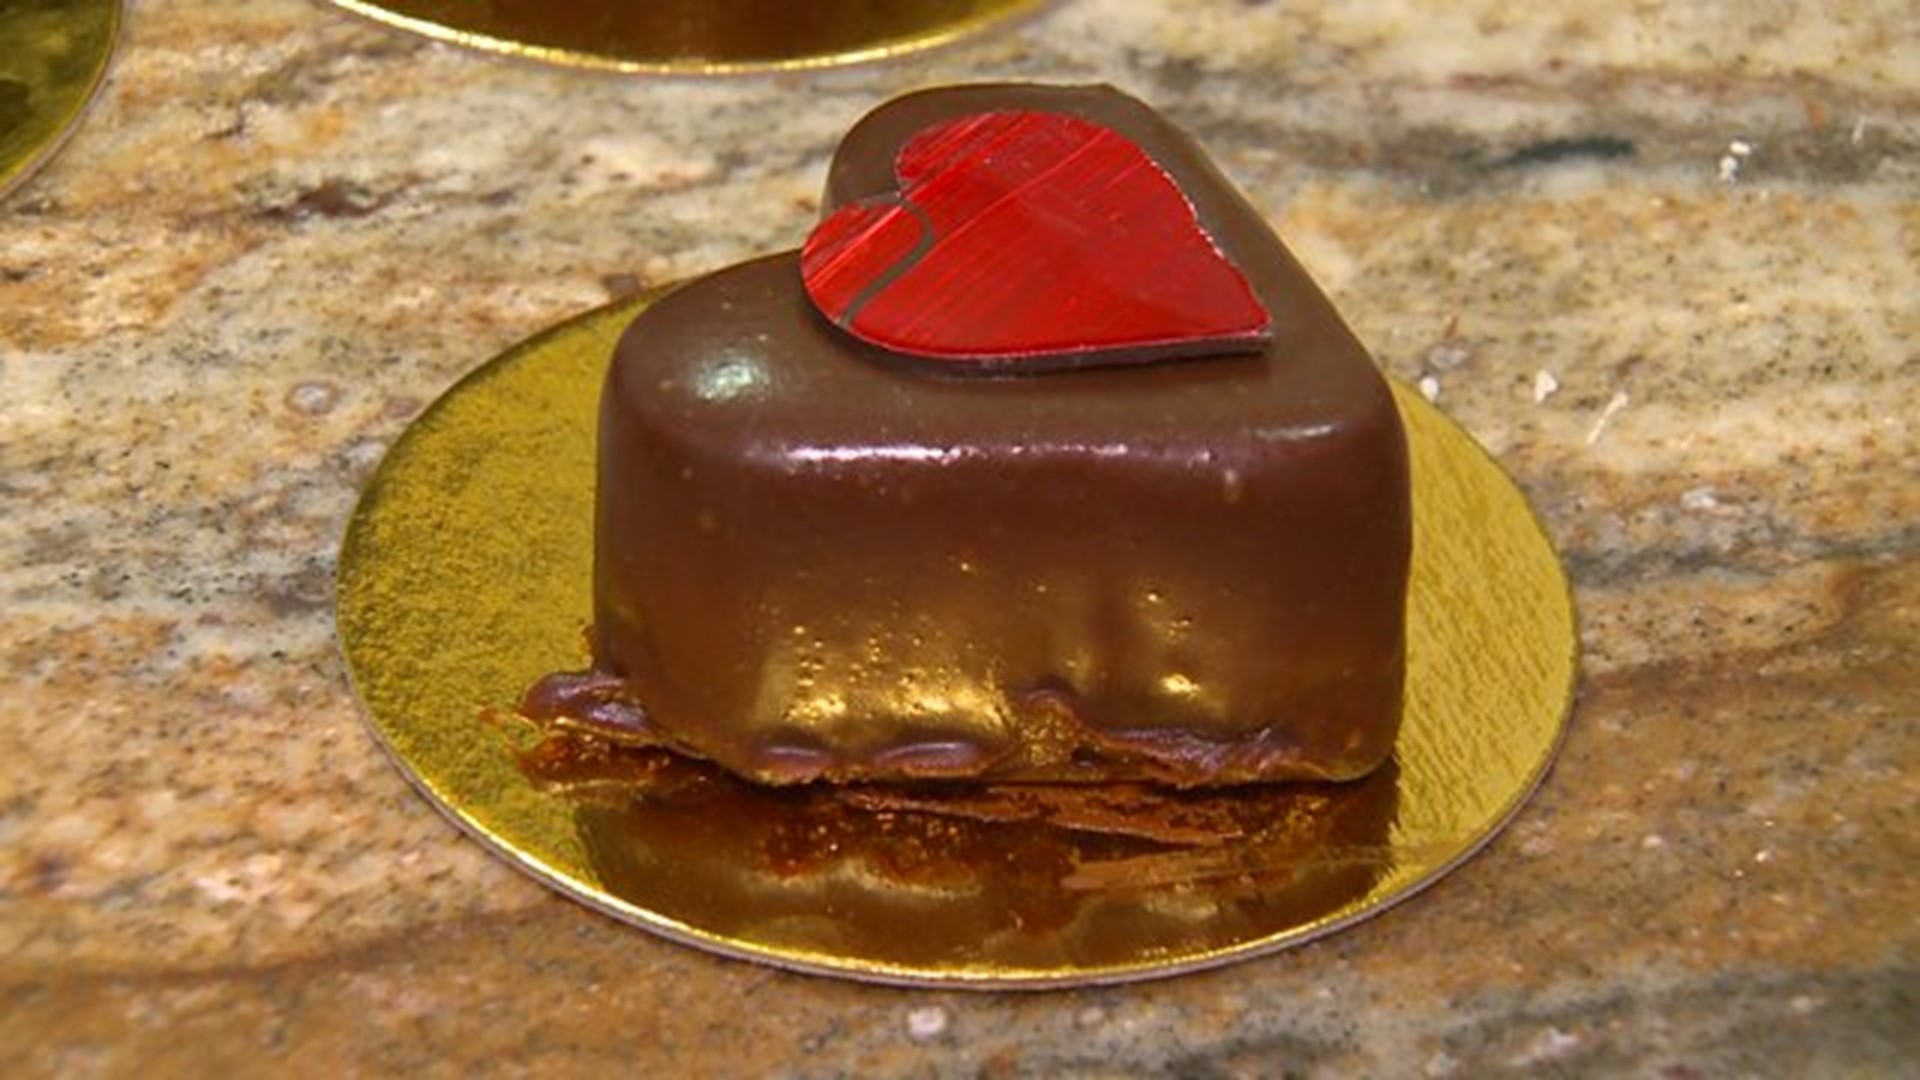 Chocolate making in Middletown on Valentine`s Day